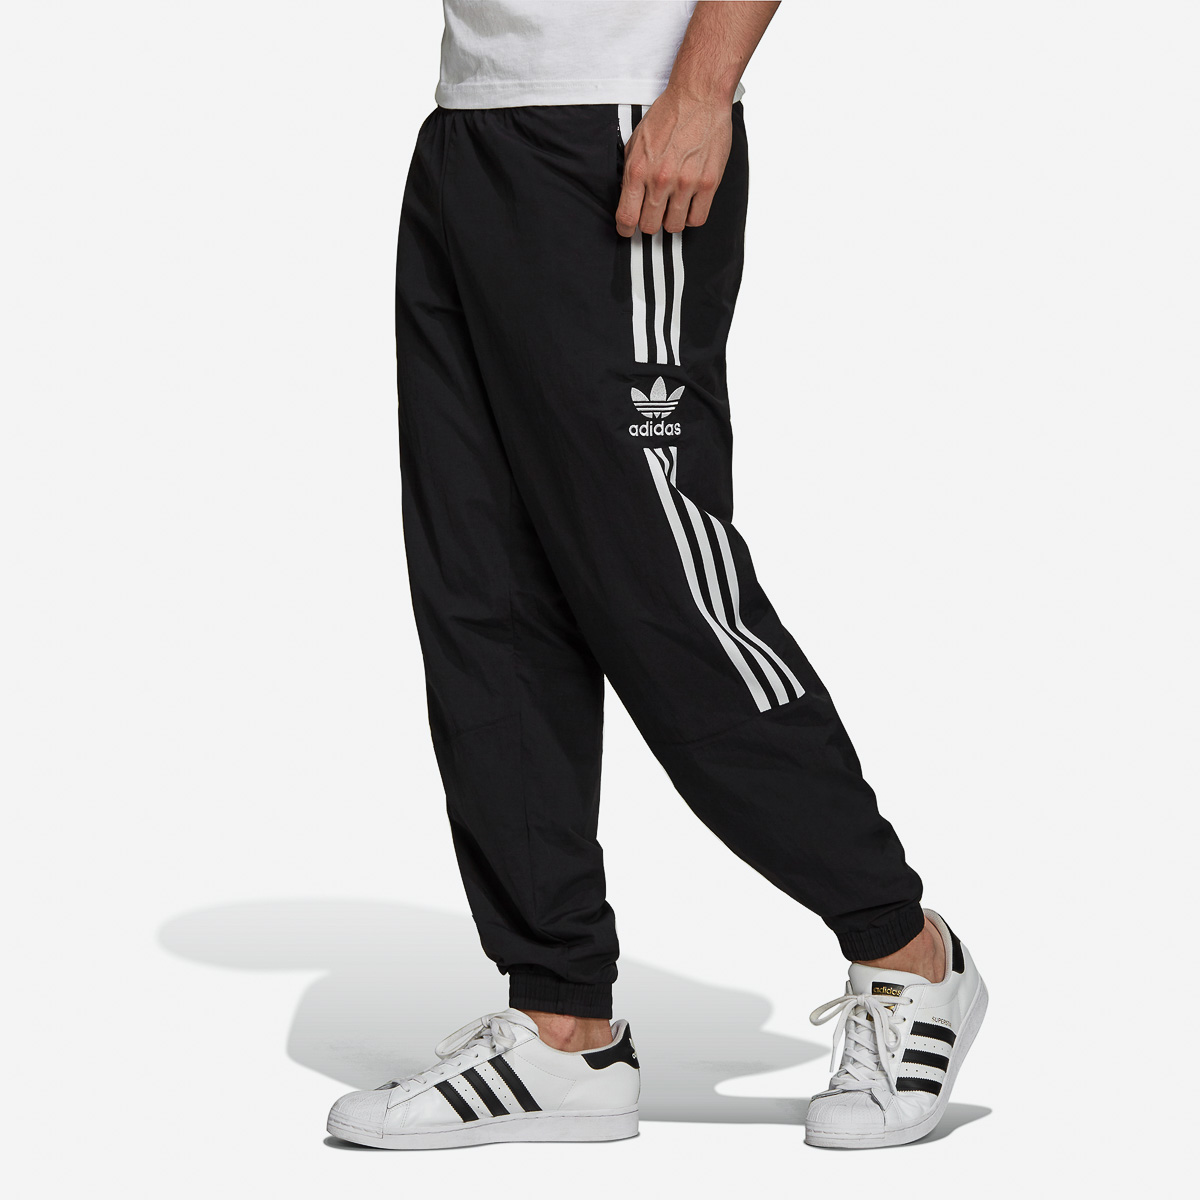 Lock Up Woven Track Pant - Black